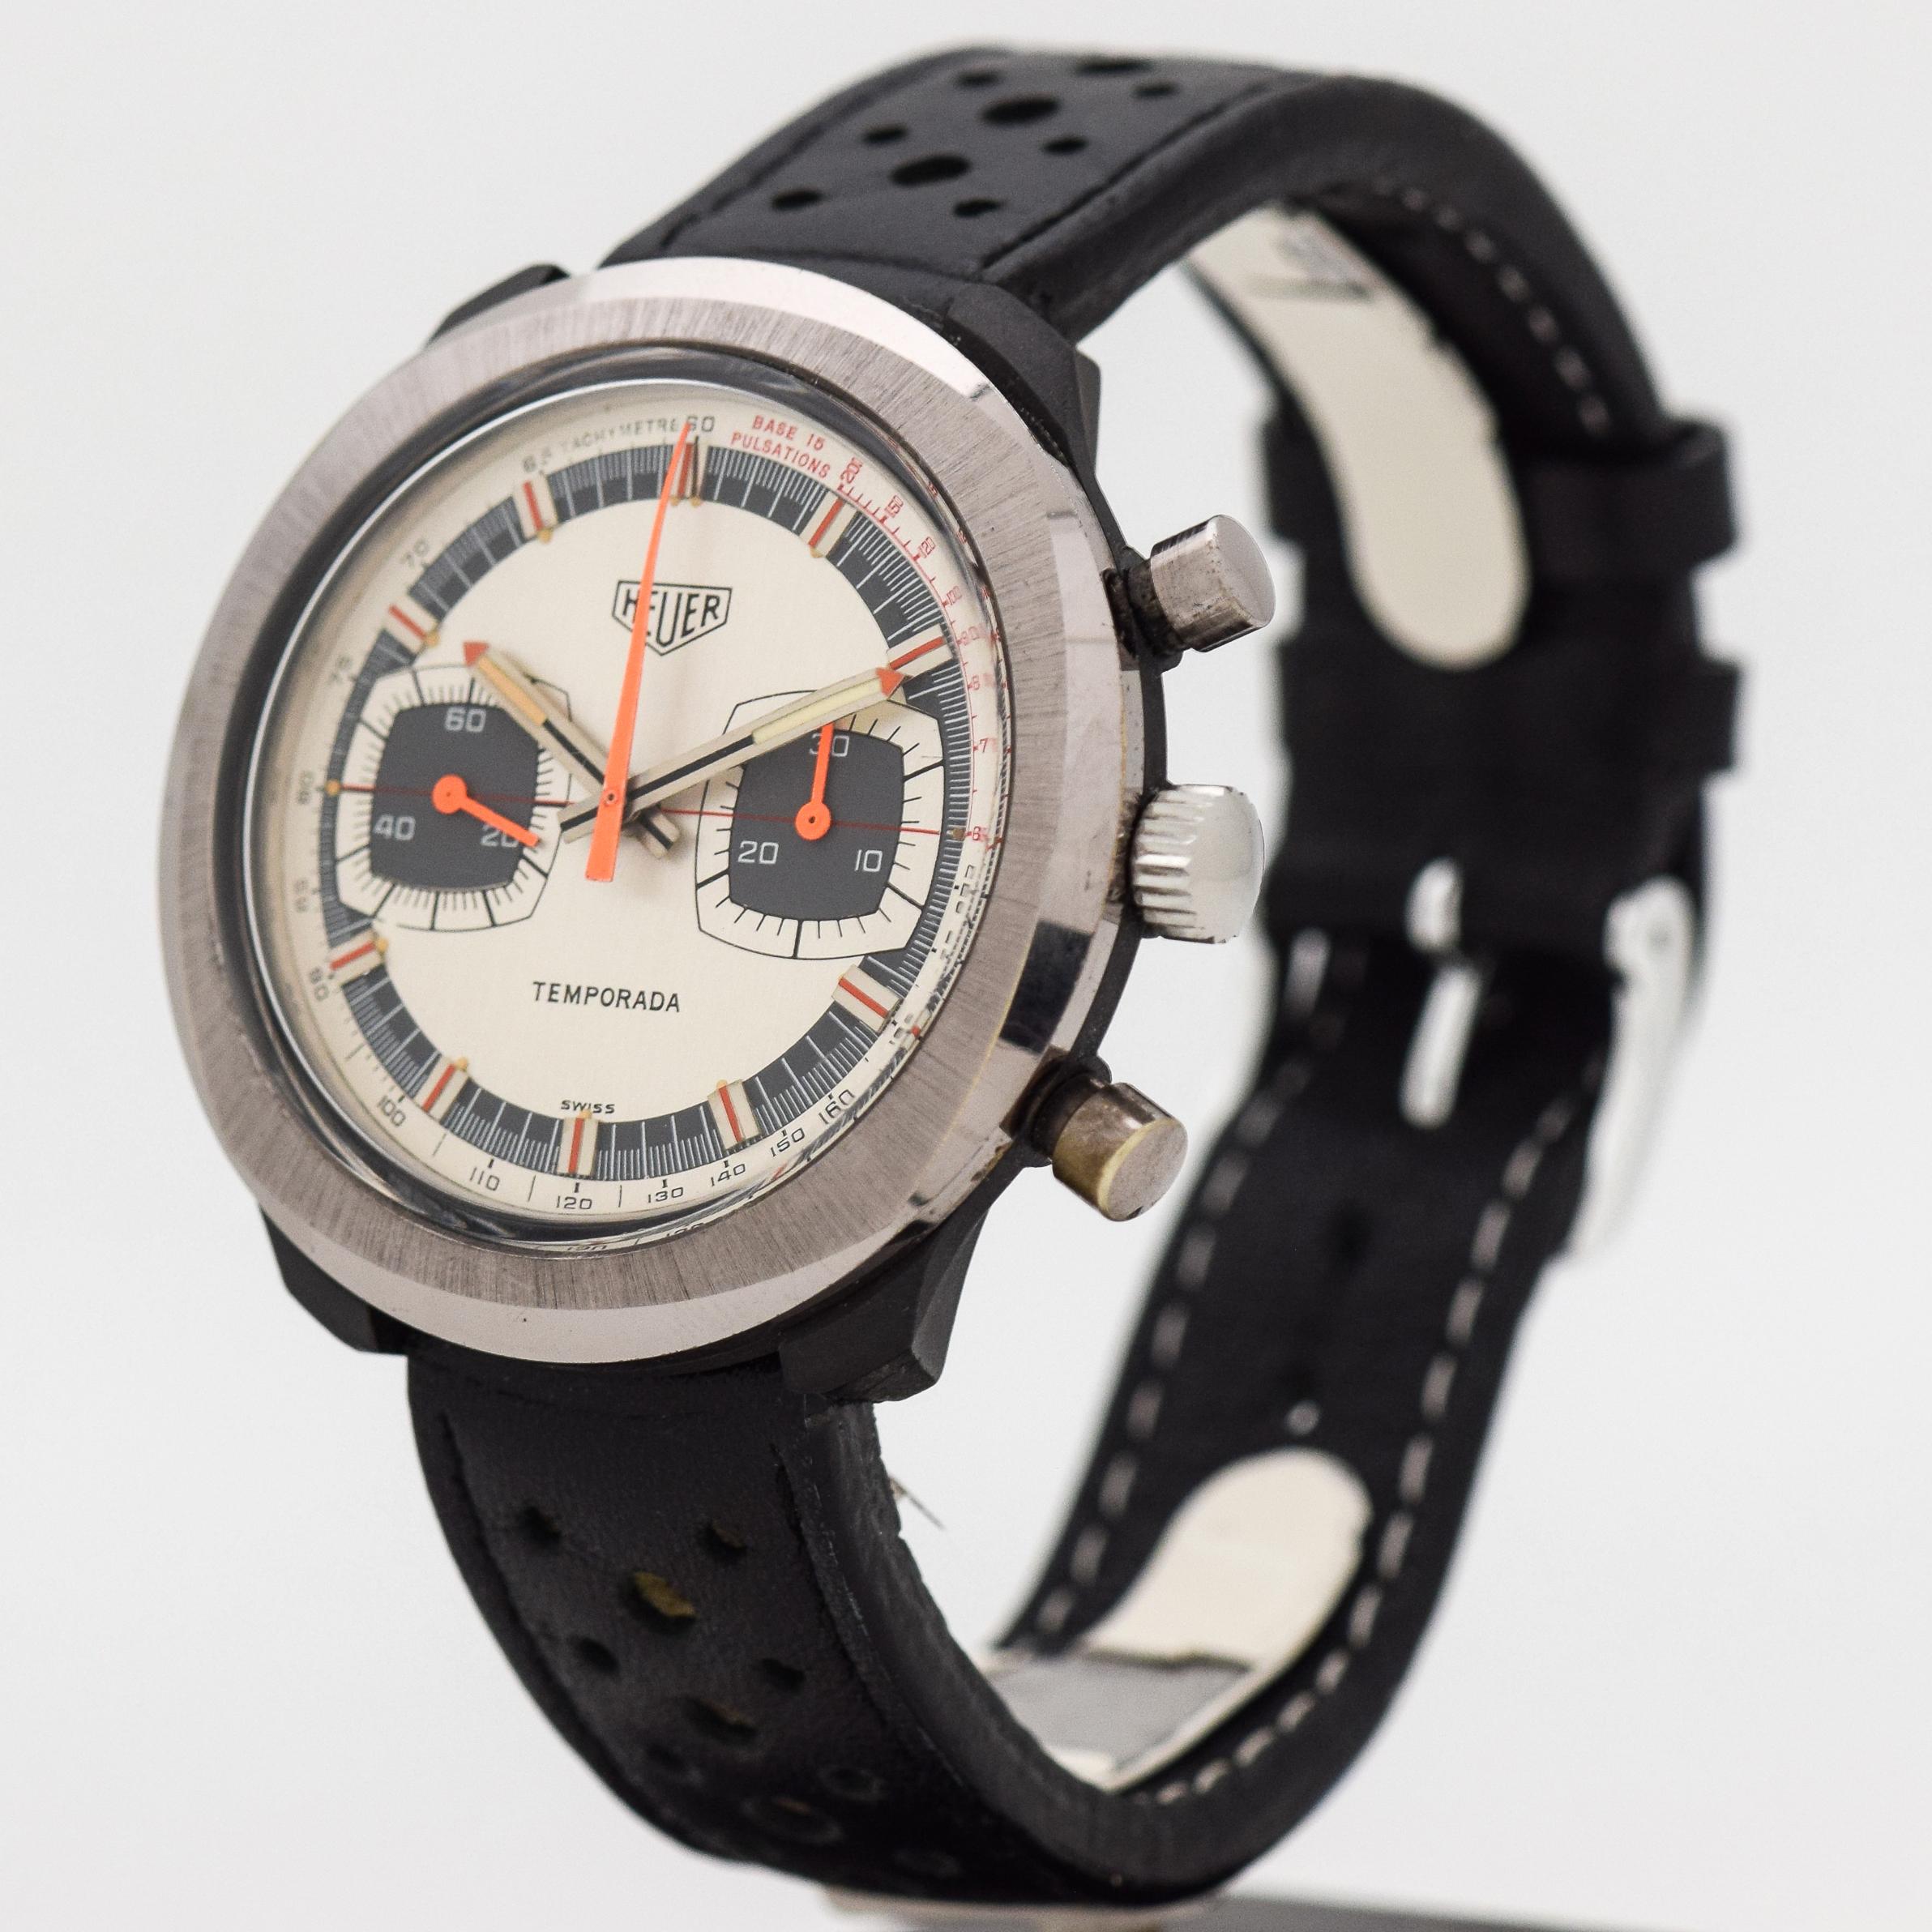 Vintage Heuer Temporado Stainless Steel and Plastic Watch, 1970s In Excellent Condition For Sale In Beverly Hills, CA